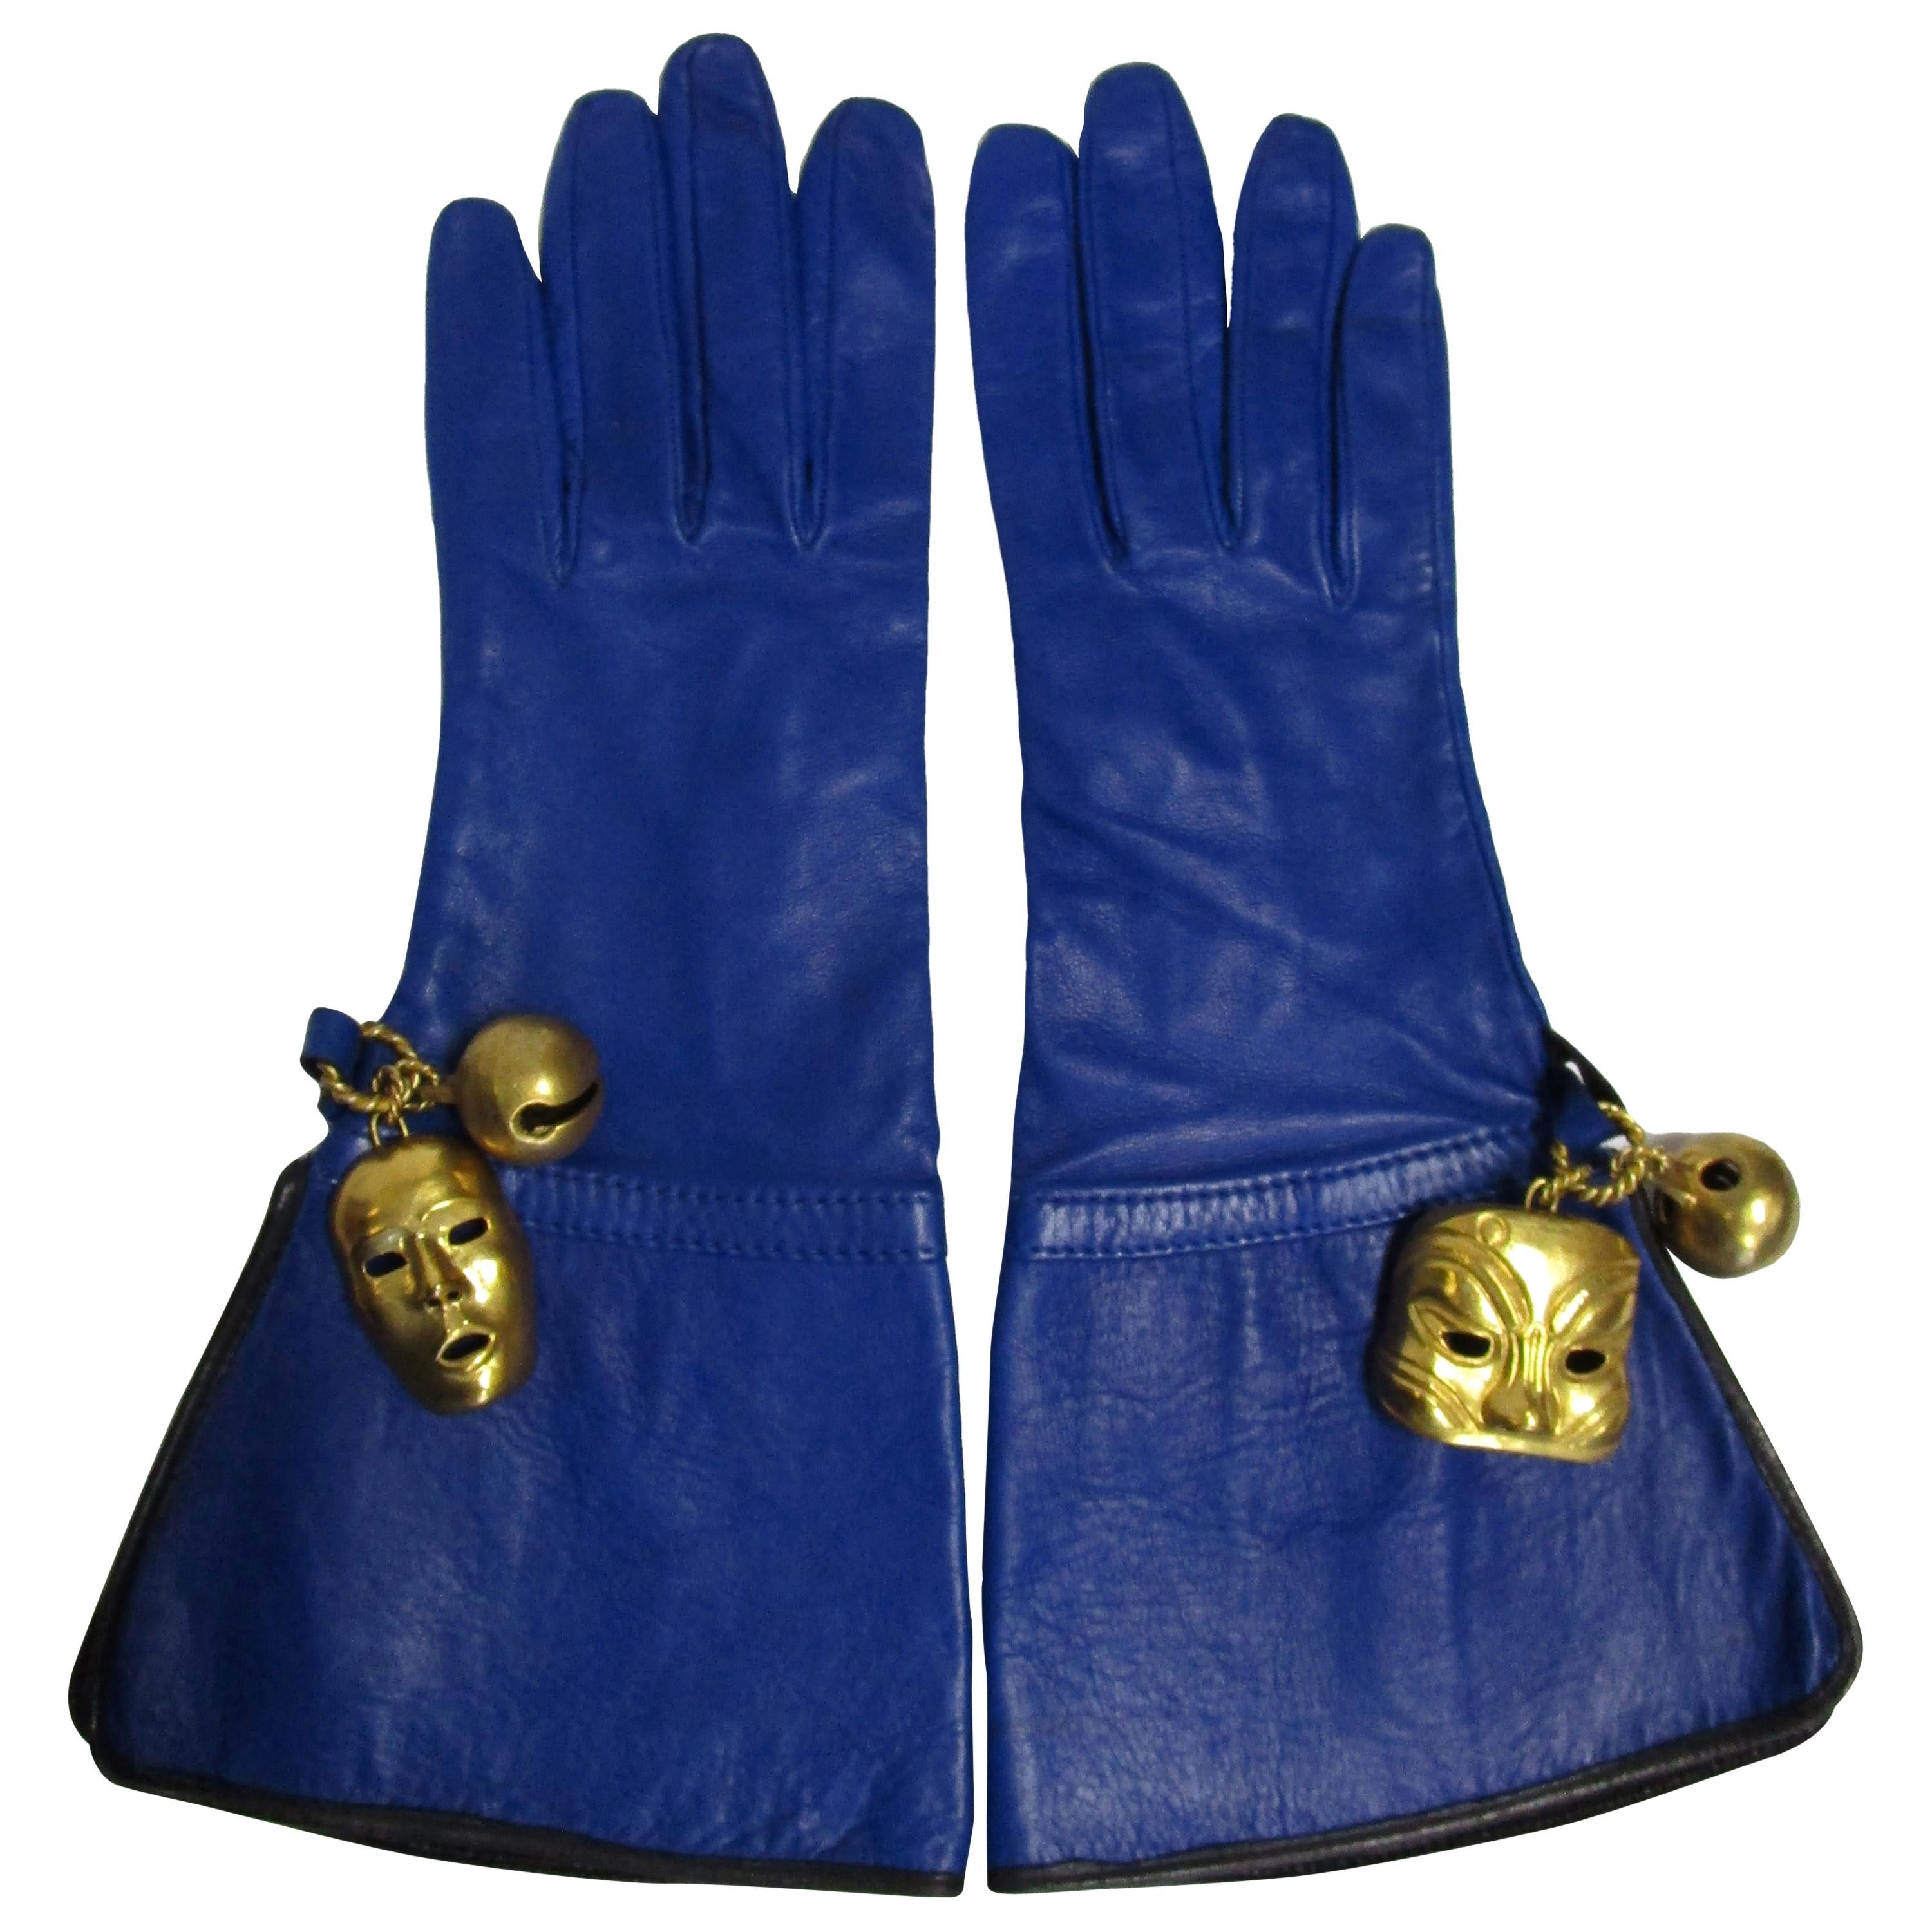 
Breathtakingly designed gloves from Isabel Canovas feature a supple lambskin decorated with theatre muse masks and bells. 

(an excerpt from DKF Estate Jewelry)
Isabel was born in Paris in 1945. Her Spanish father Blas Canovas was a couture textile